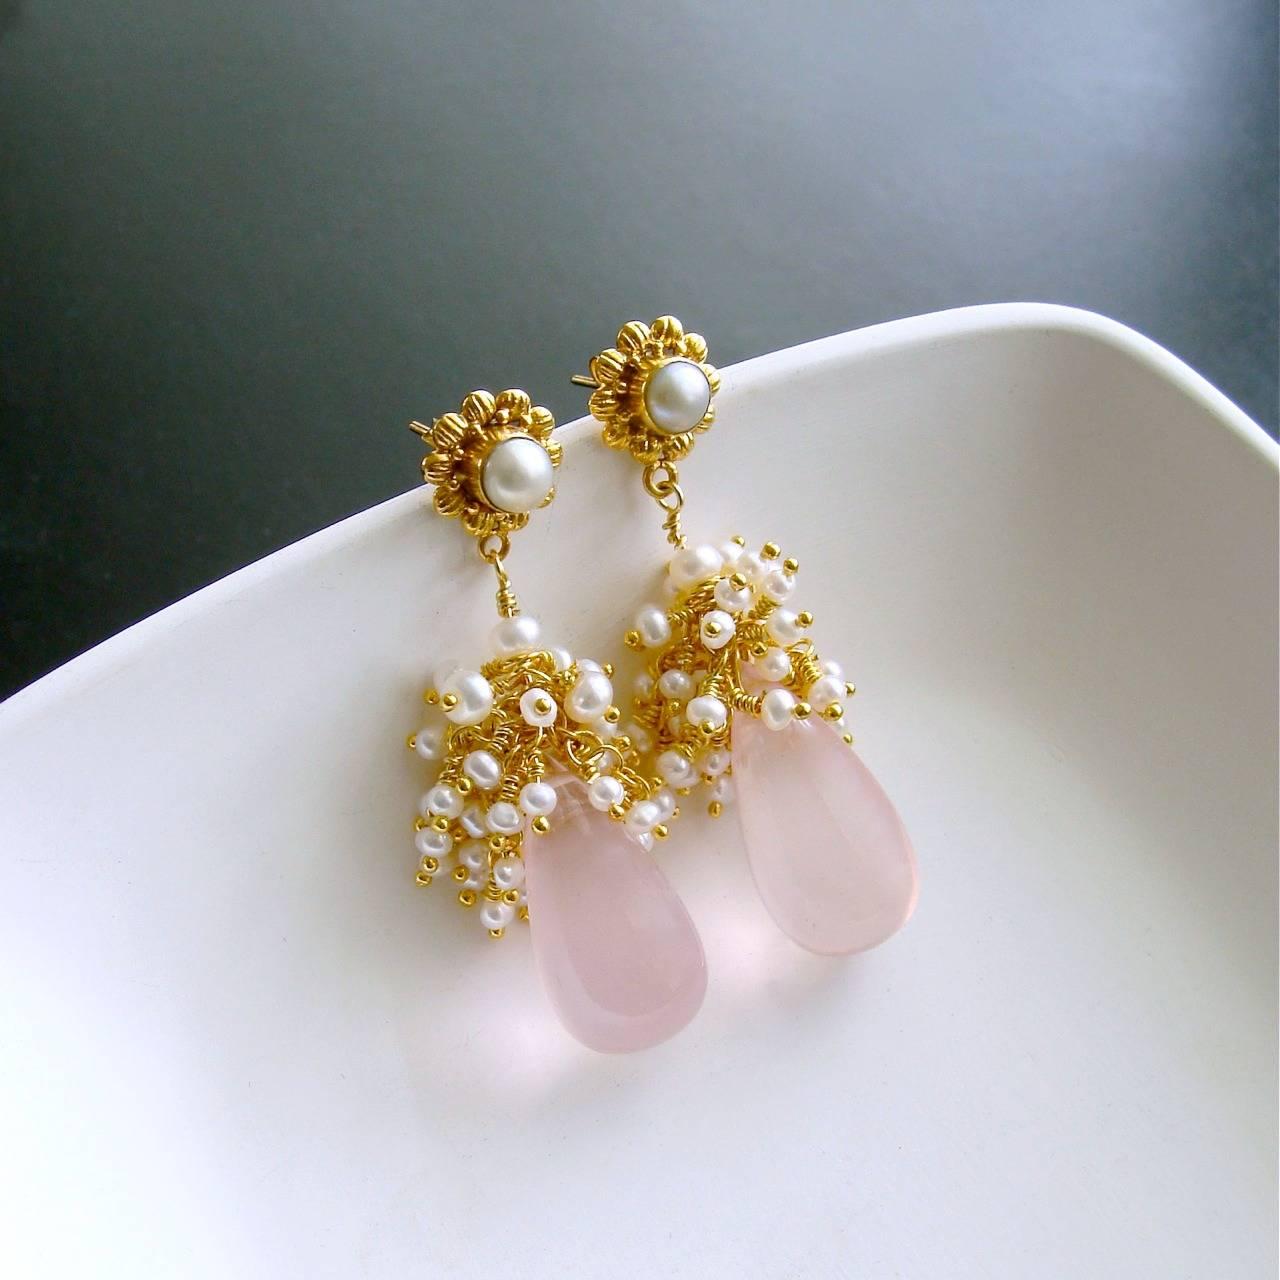 Pétales de Rose III Earrings.

Delicate blush pink and diaphanous smooth-cut rose quartz briolettes are crowned with a frothy explosion of creamy white seed pearls to create a traditional, yet uniquely feminine, pair of  earrings. This ladylike